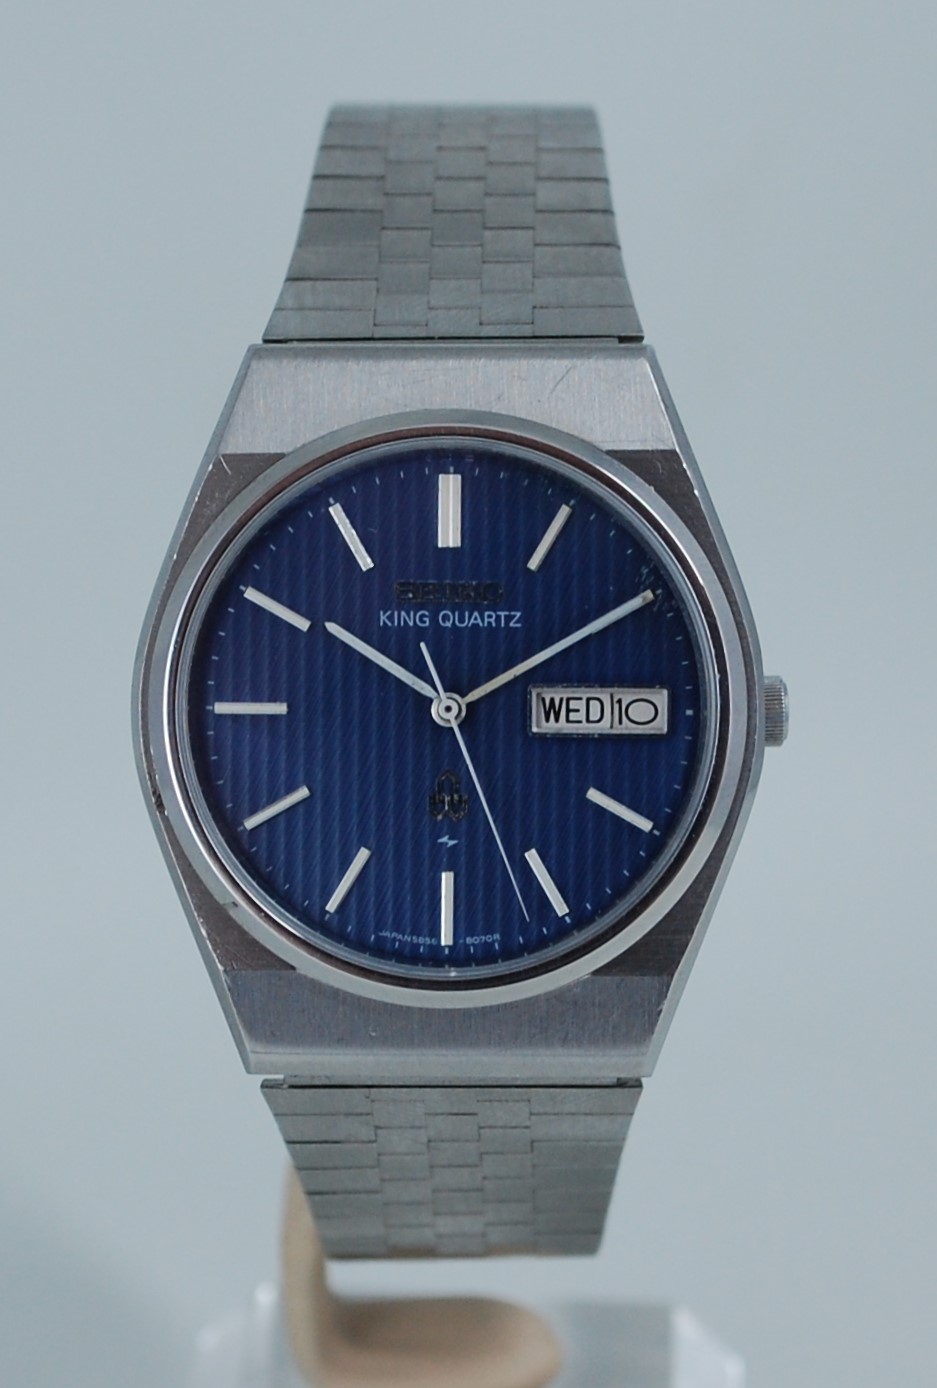 SOLD 1978 Seiko King Quartz with blue dial - Birth Year Watches